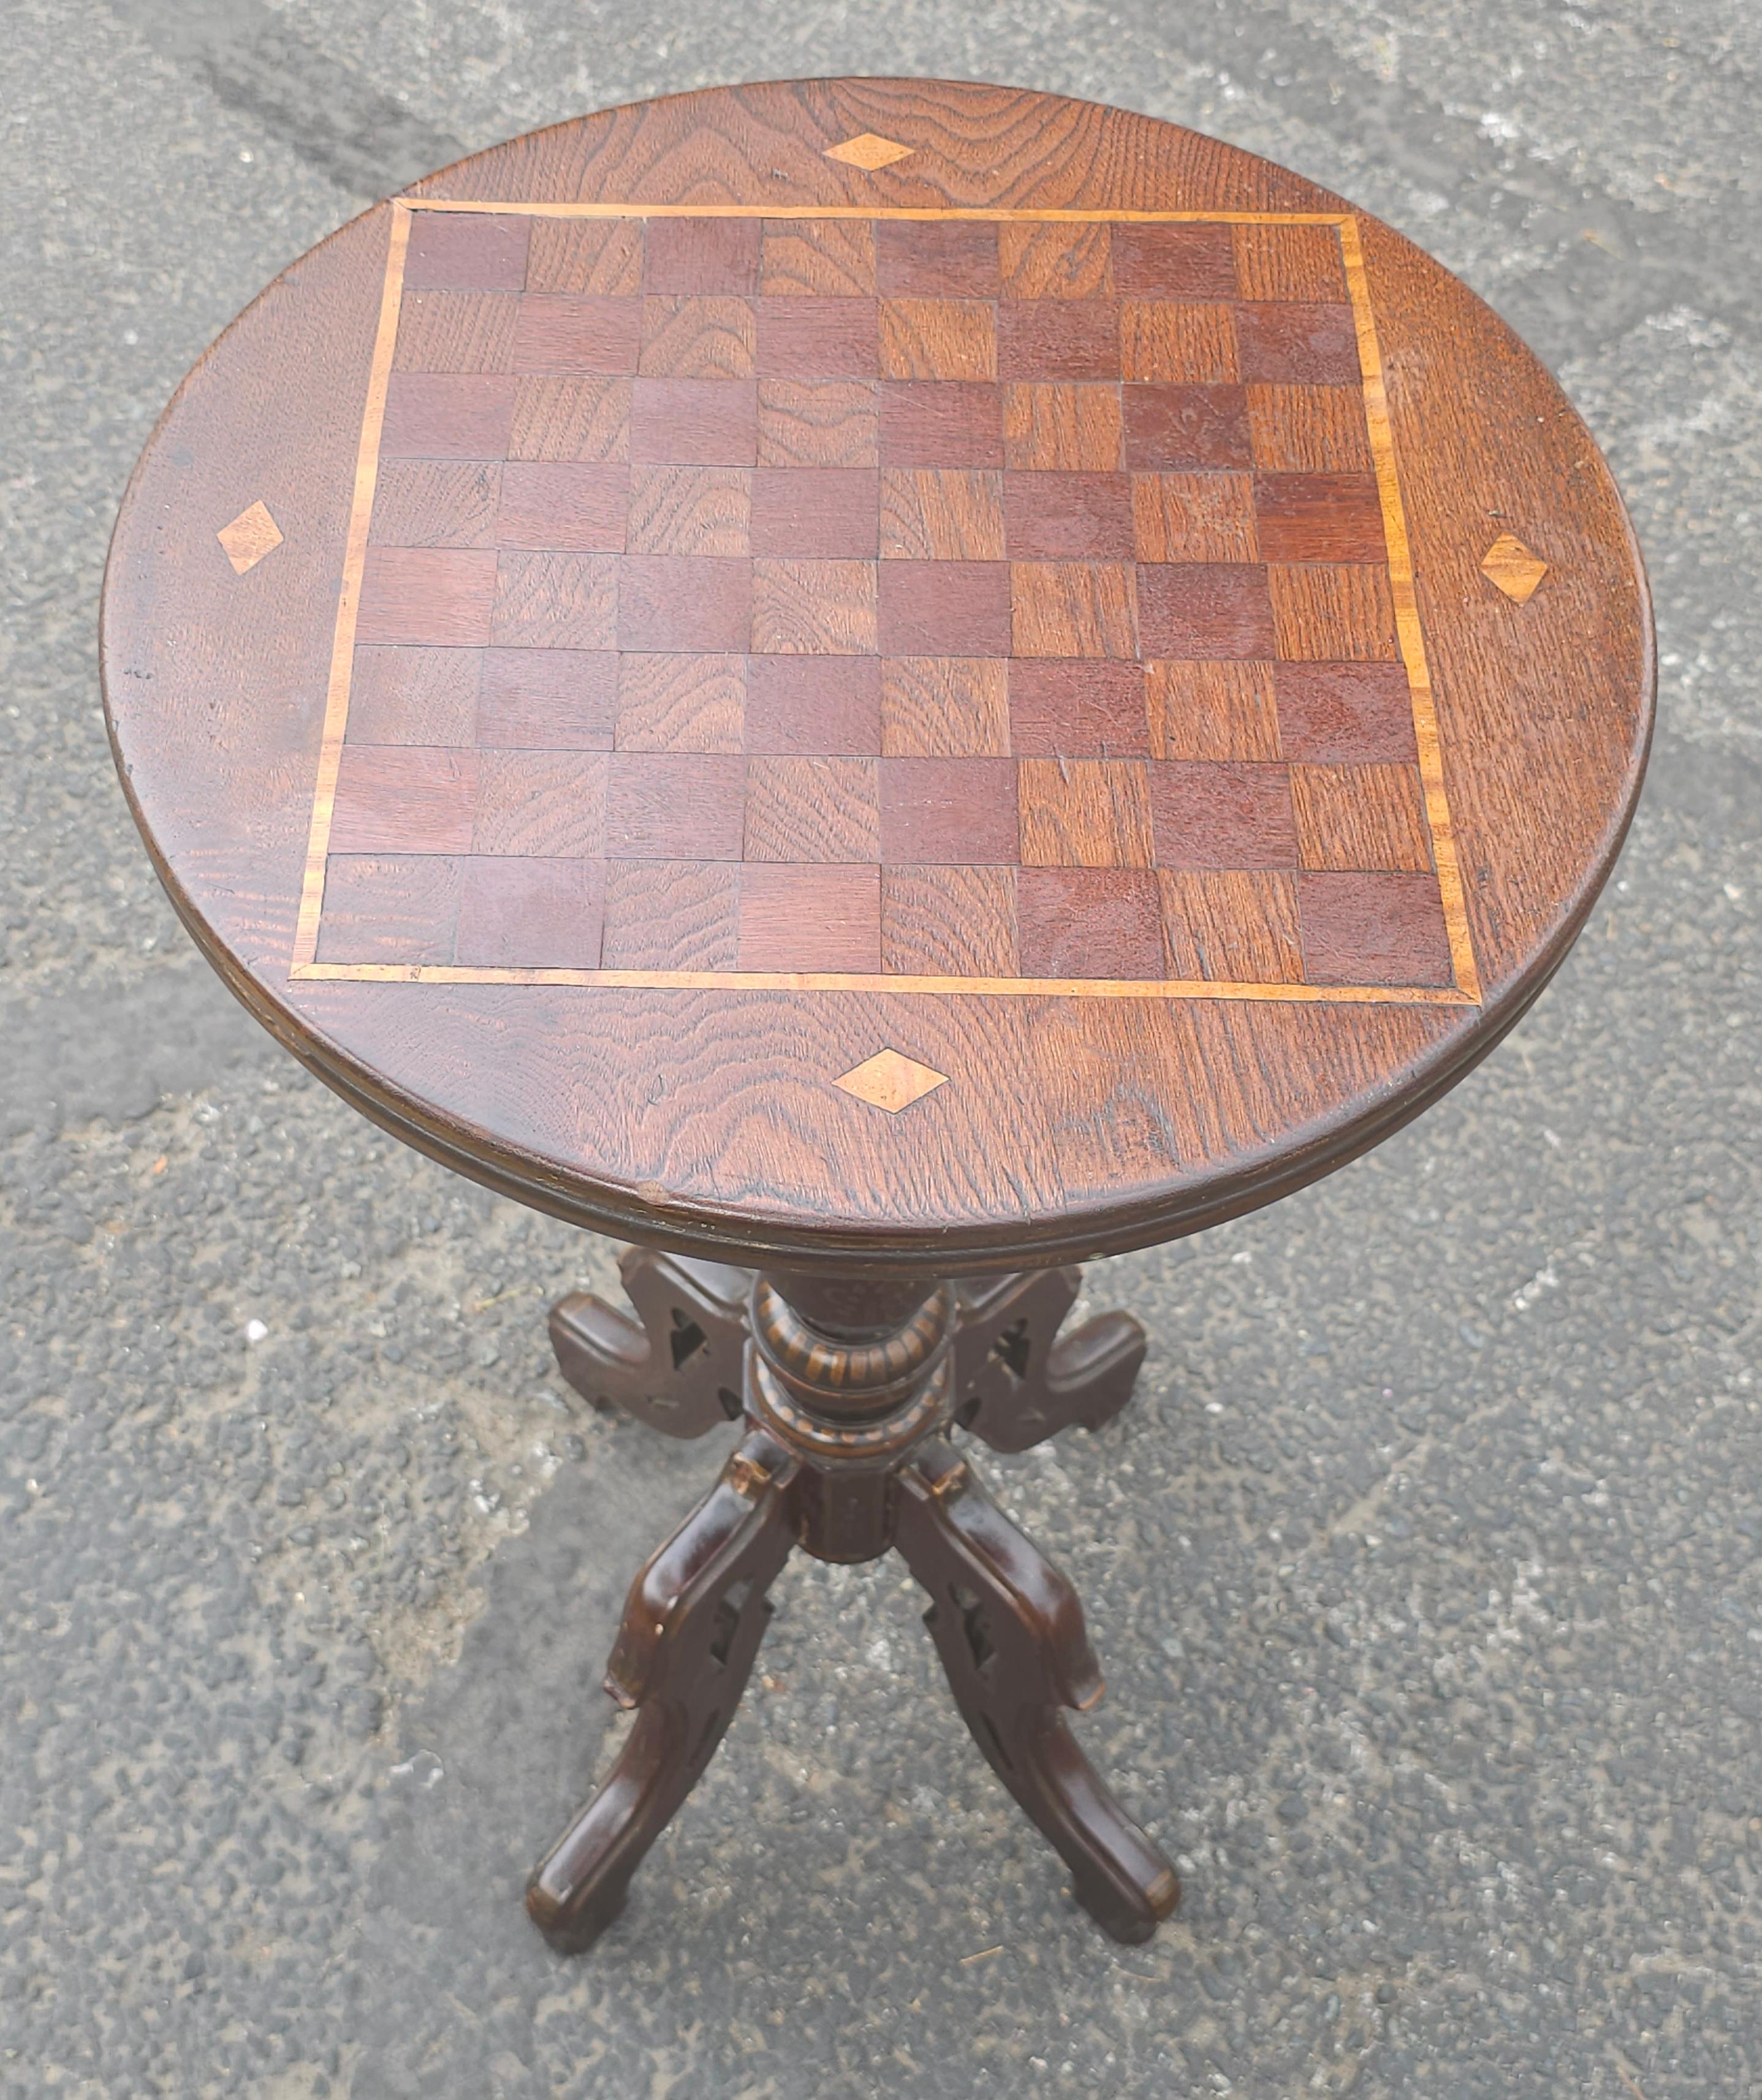 19th Century Victorian Oak & Mixed Wood Parquetry and Inlay Pedestal Game Table For Sale 1